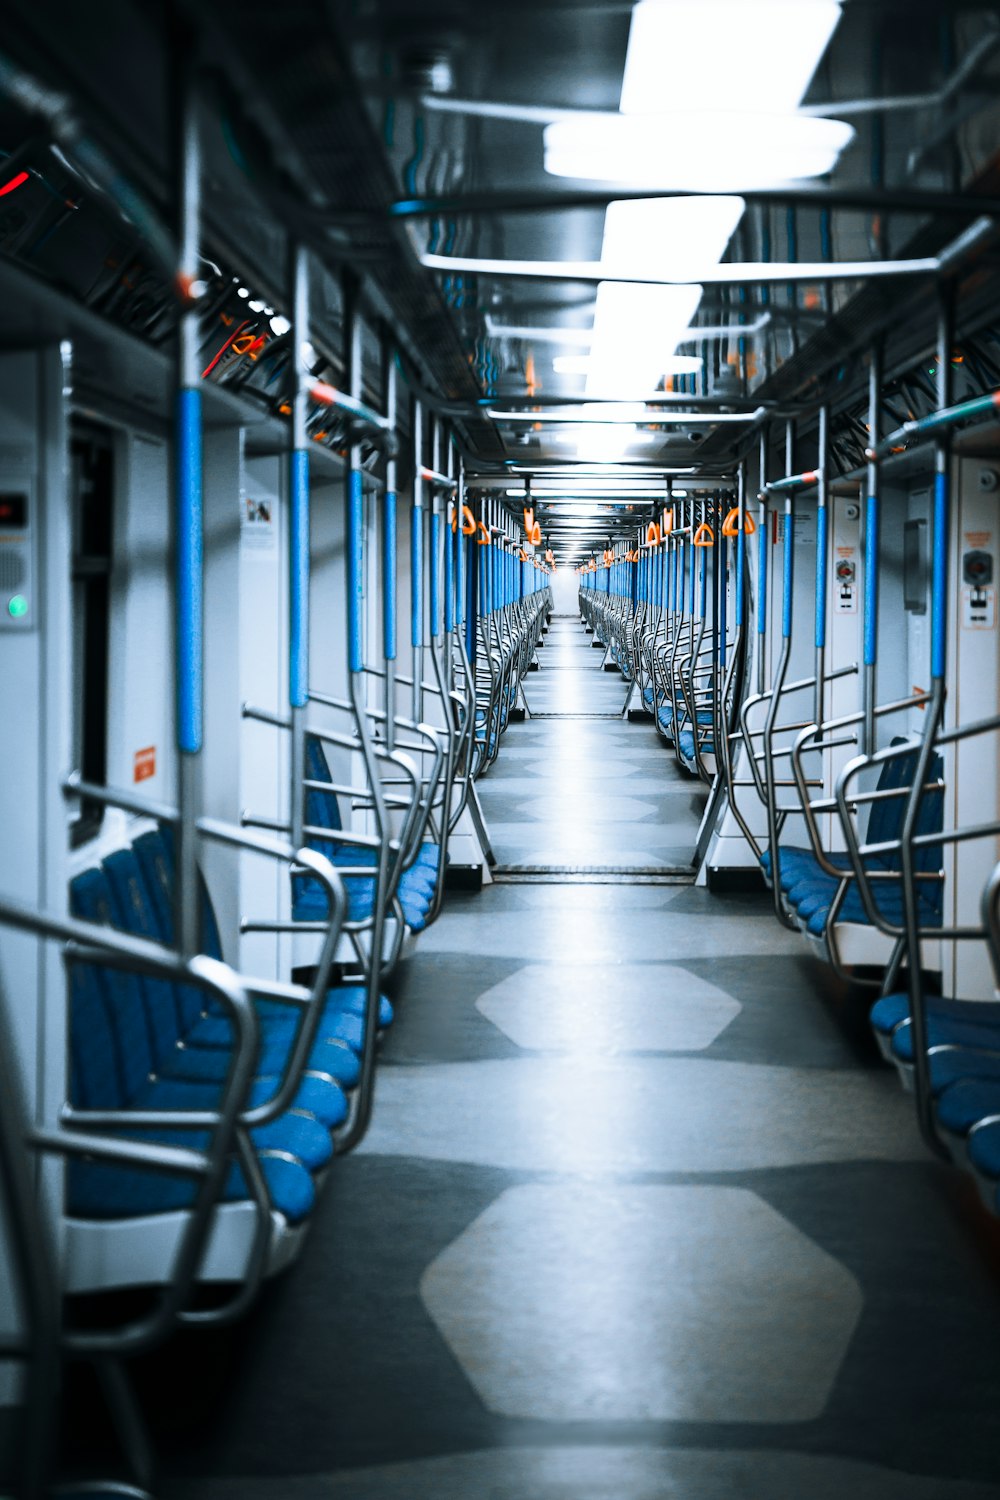 a long empty train car with blue seats